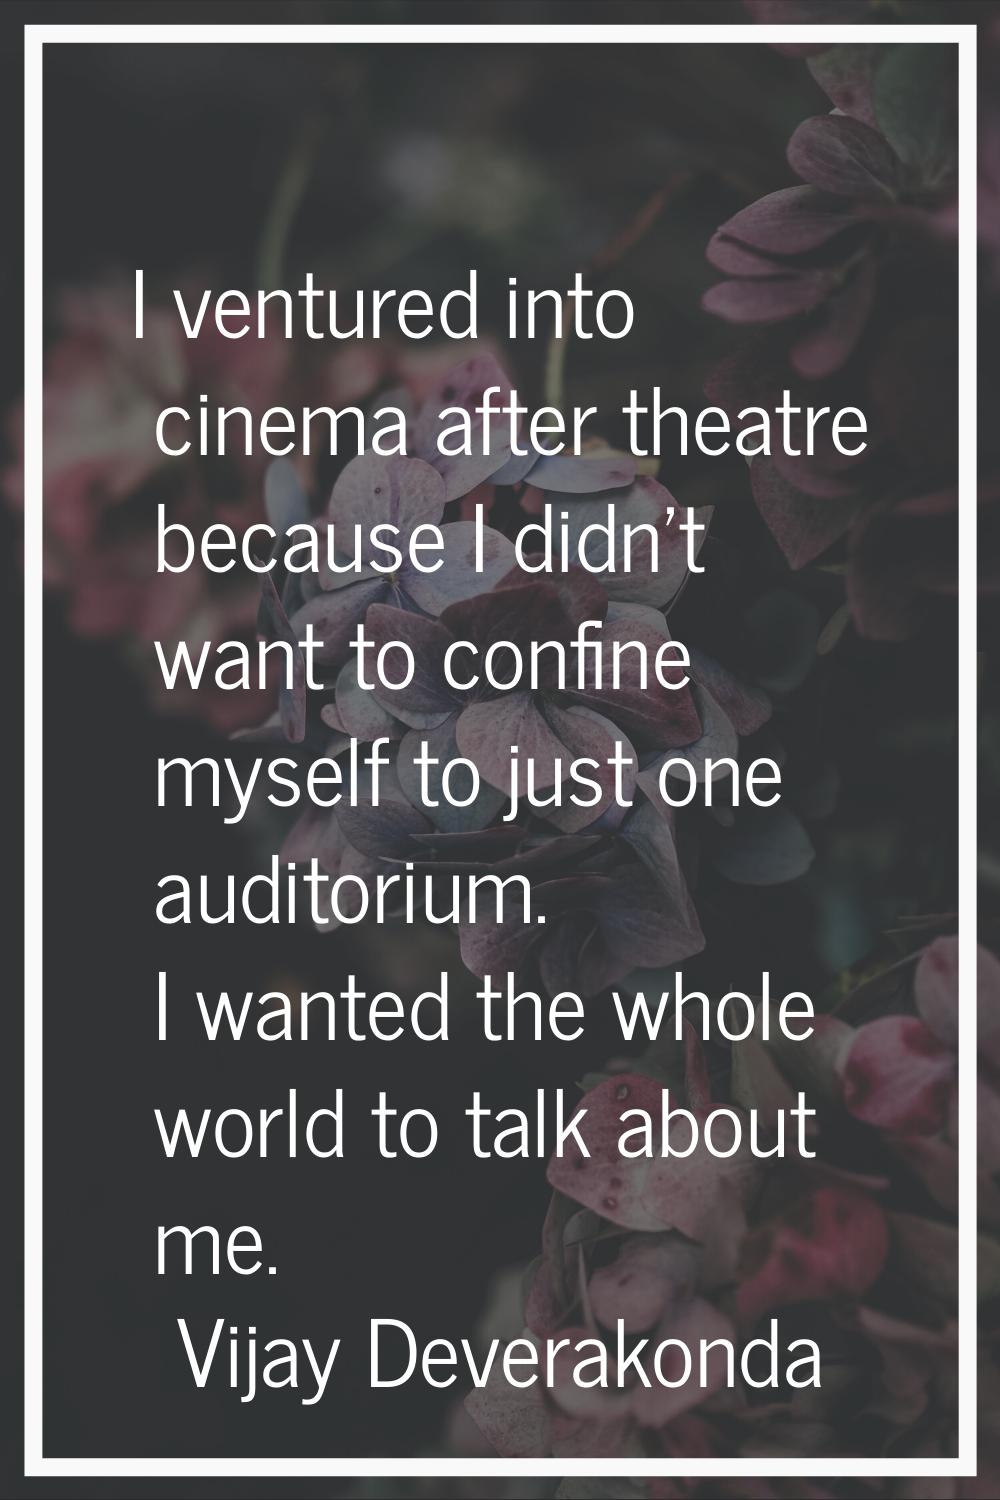 I ventured into cinema after theatre because I didn't want to confine myself to just one auditorium